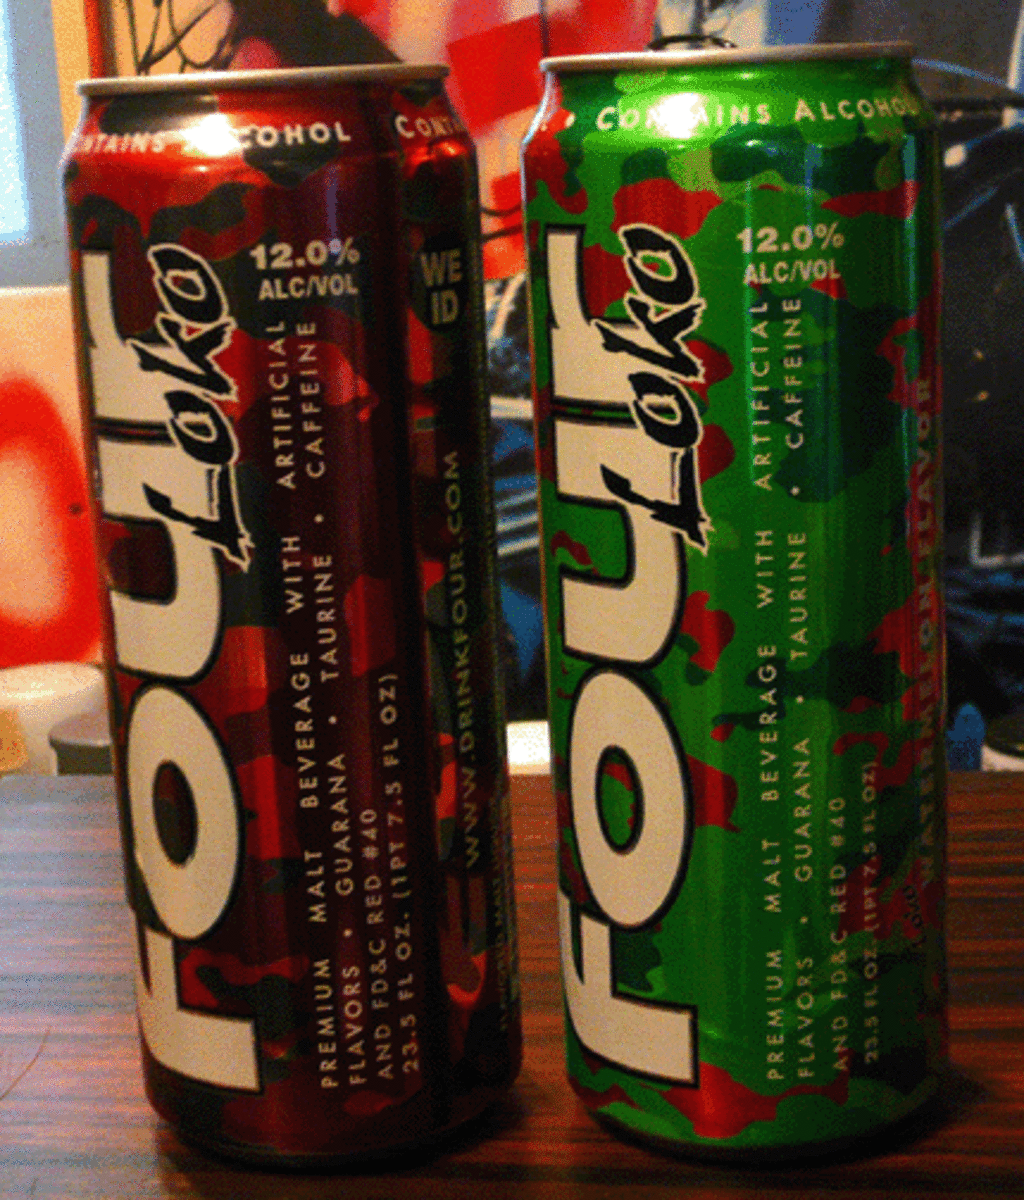 Four Loko alcoholic beverage with caffeine can contain 12% alcohol and is said to cause blackouts.